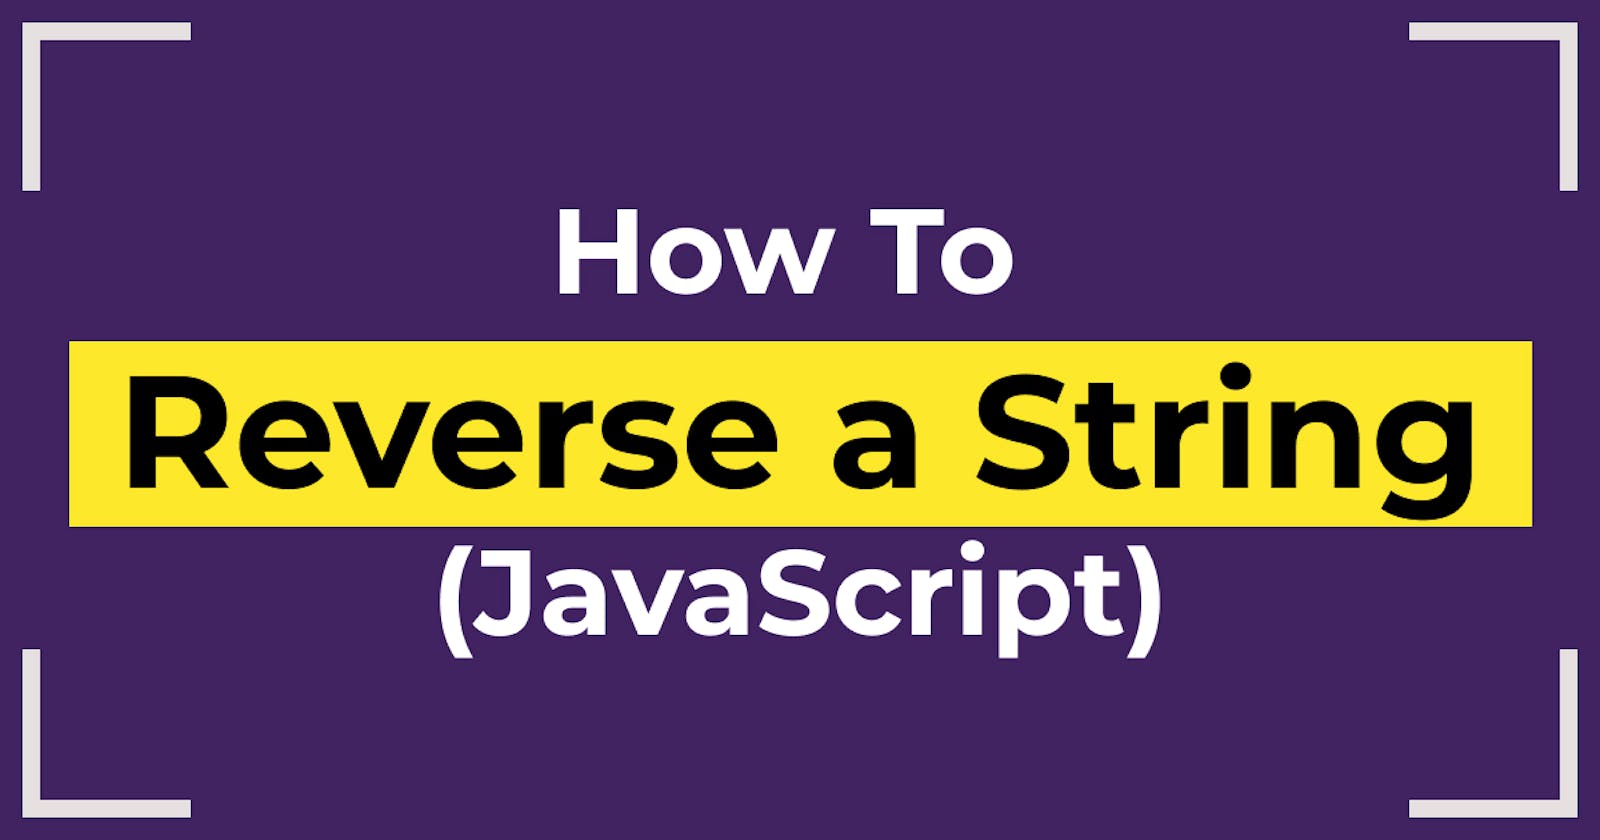 How To Reverse a String (JavaScript)